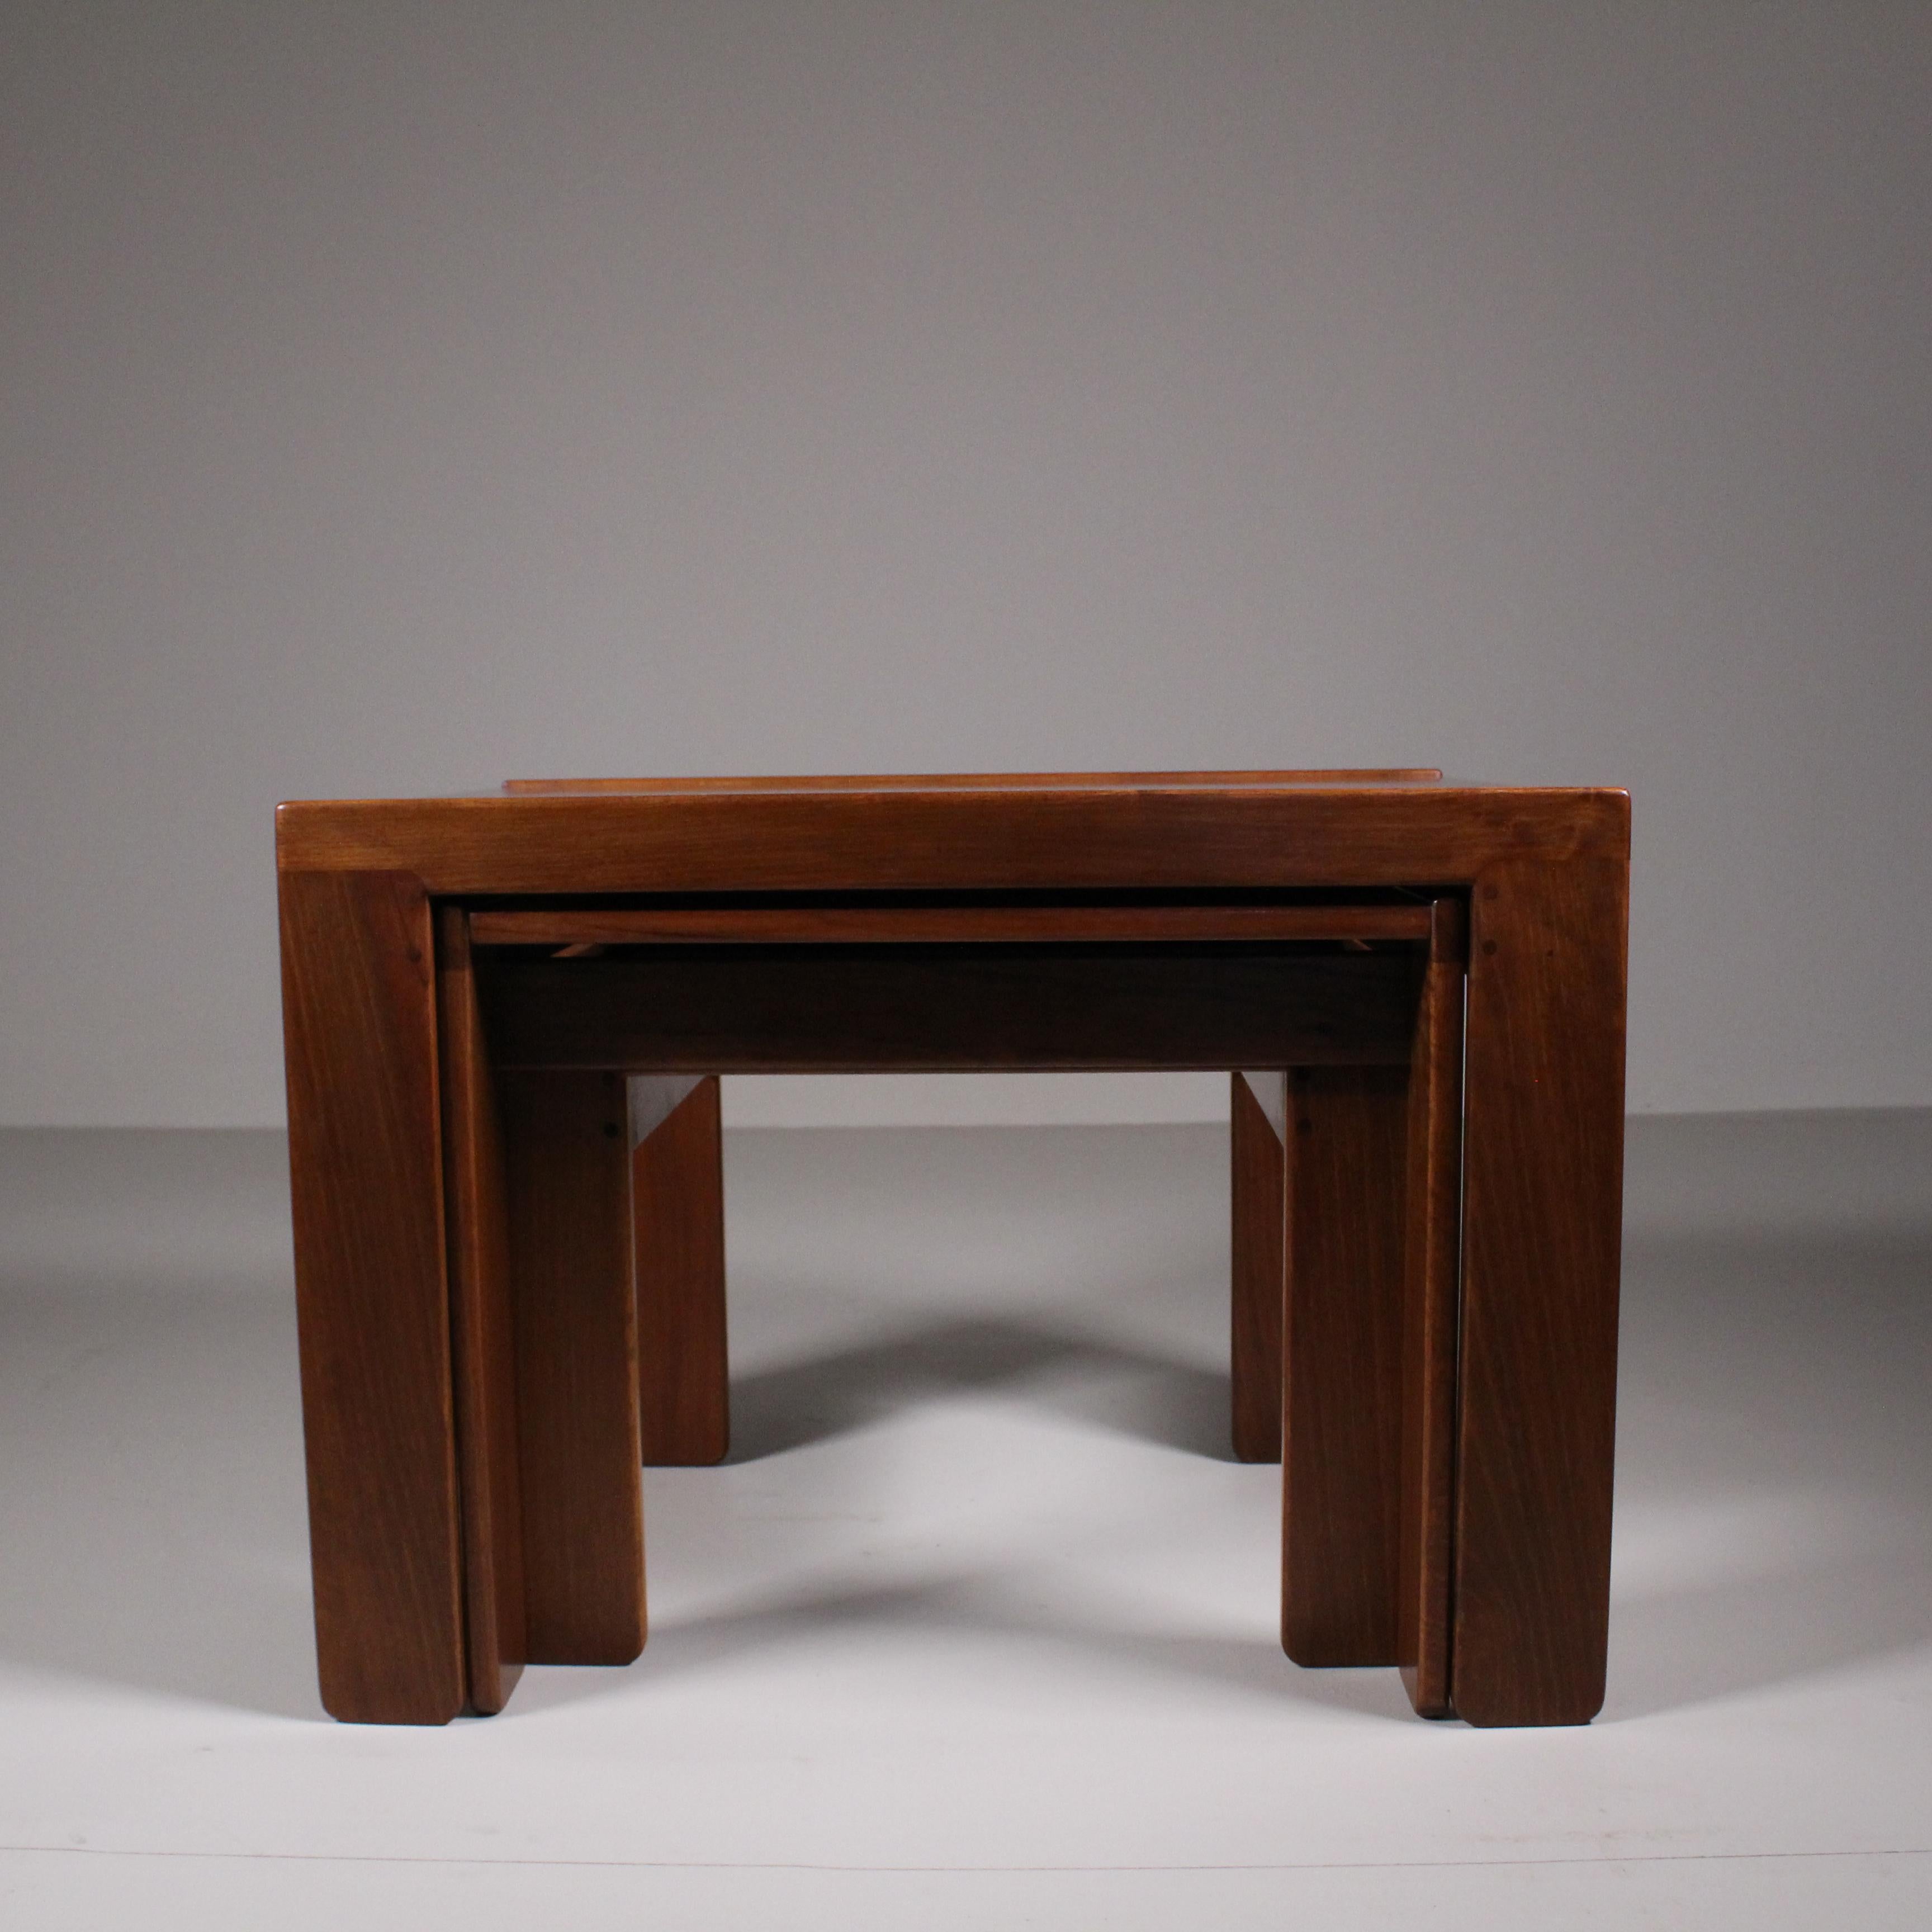 Small tables model 777, Afra and Tobia Scarpa, 1965 Circa For Sale 2